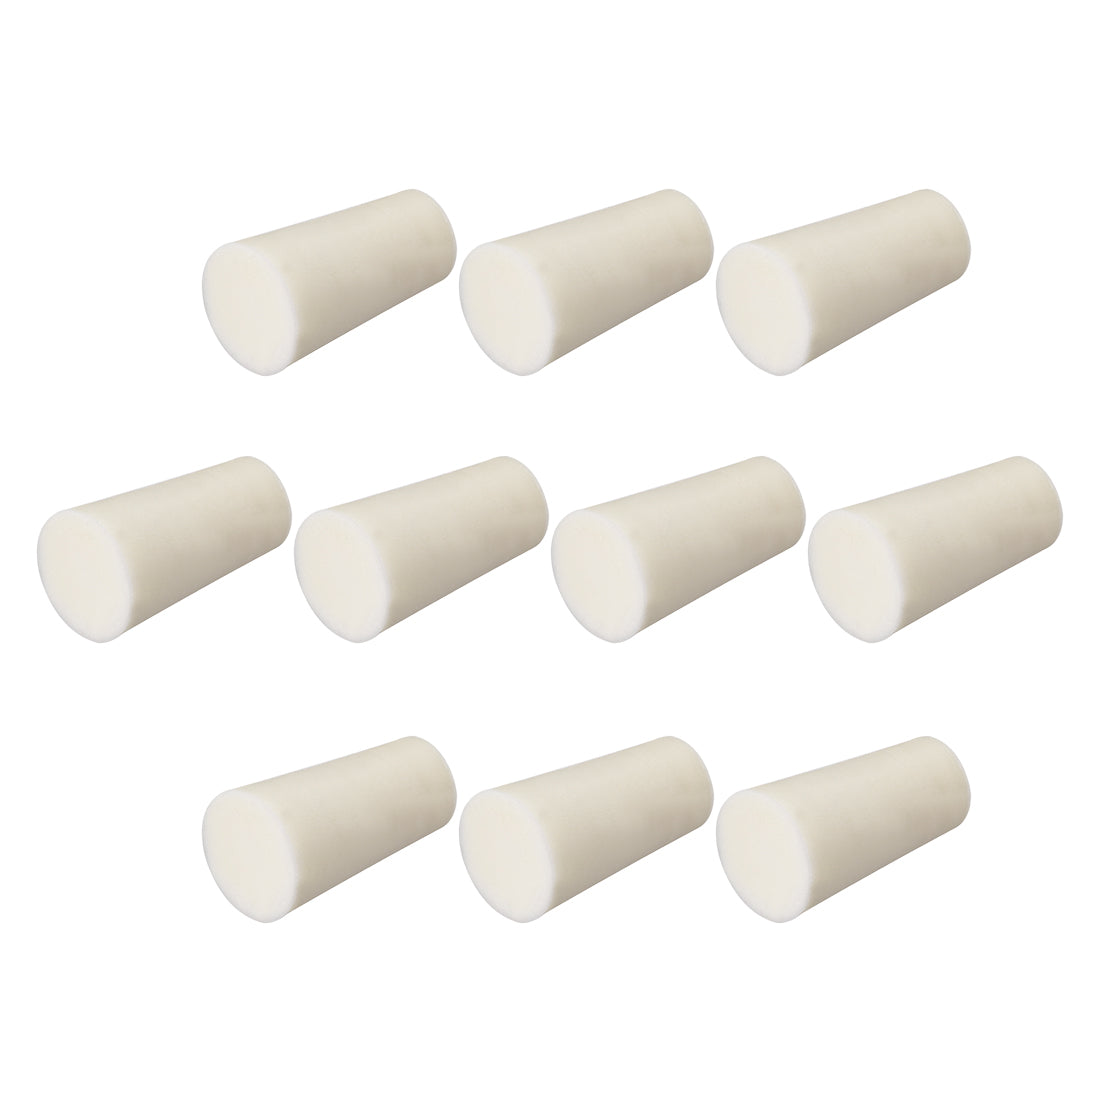 uxcell Uxcell 11-15mm Beige Drilled Silicone Stopper Plugs for Flask Test Tube Stopper 10pcs